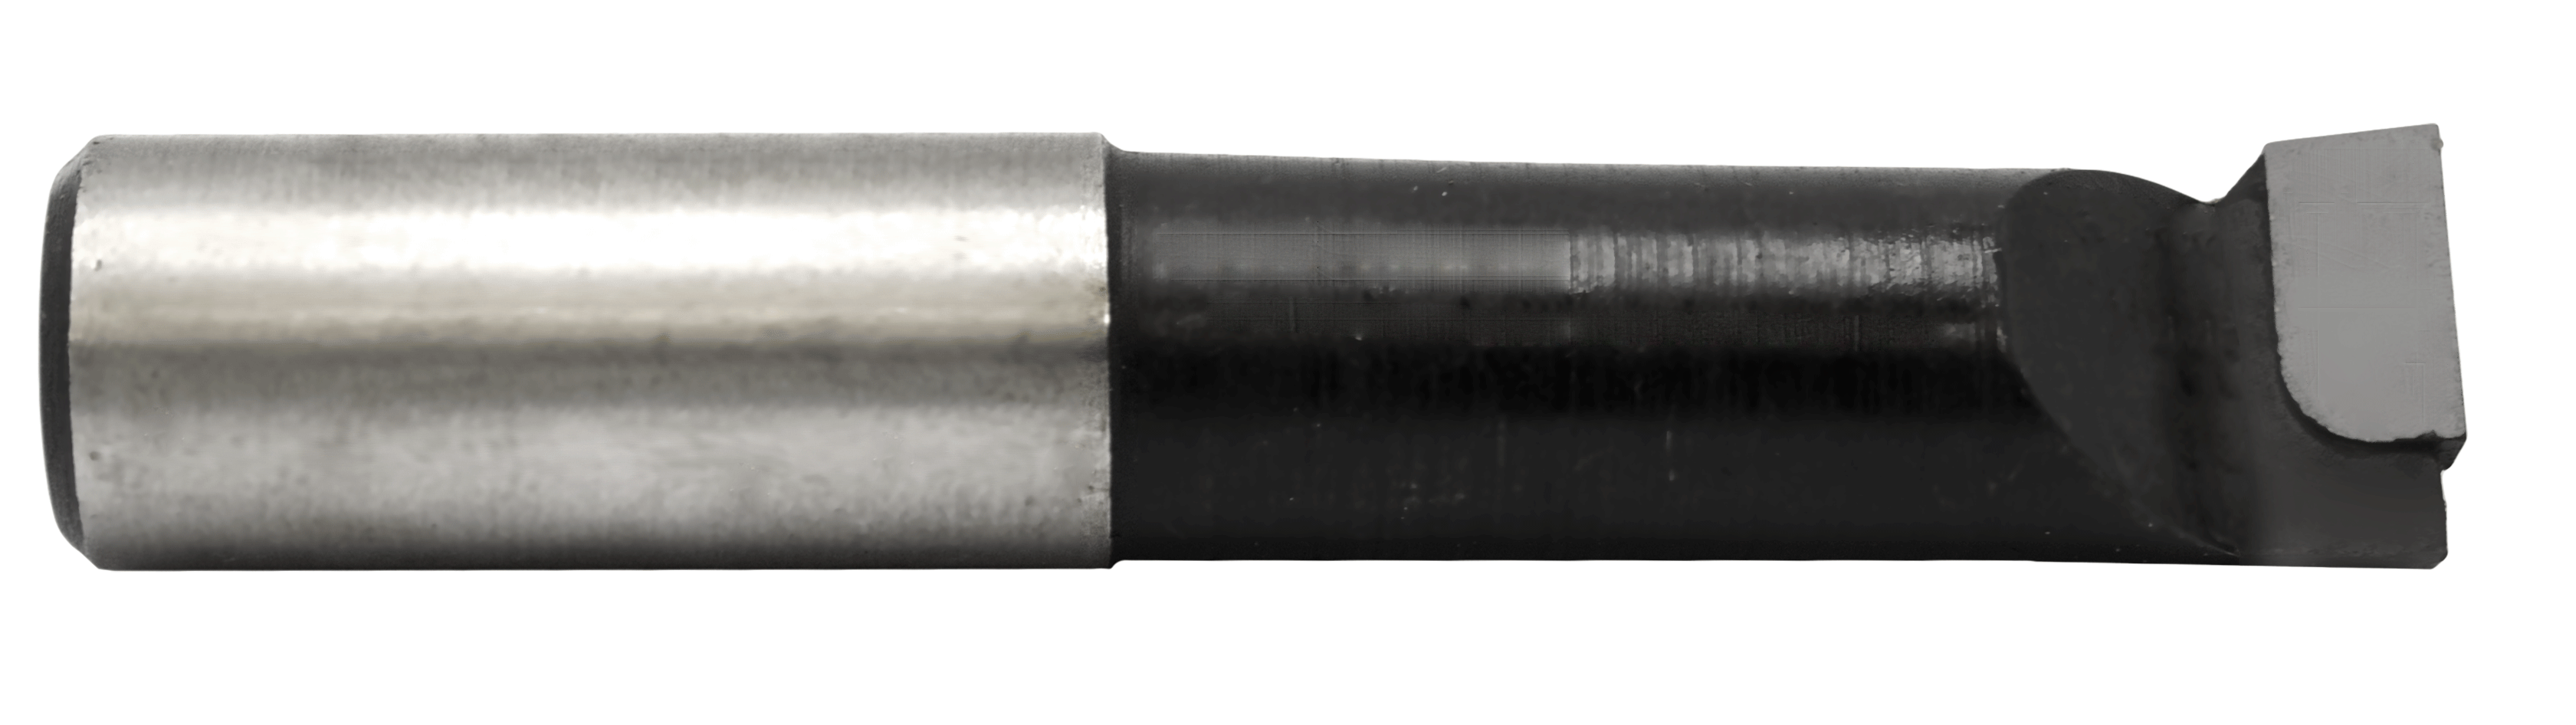 Super-Bore 12mm" C-6 for Steel Applications